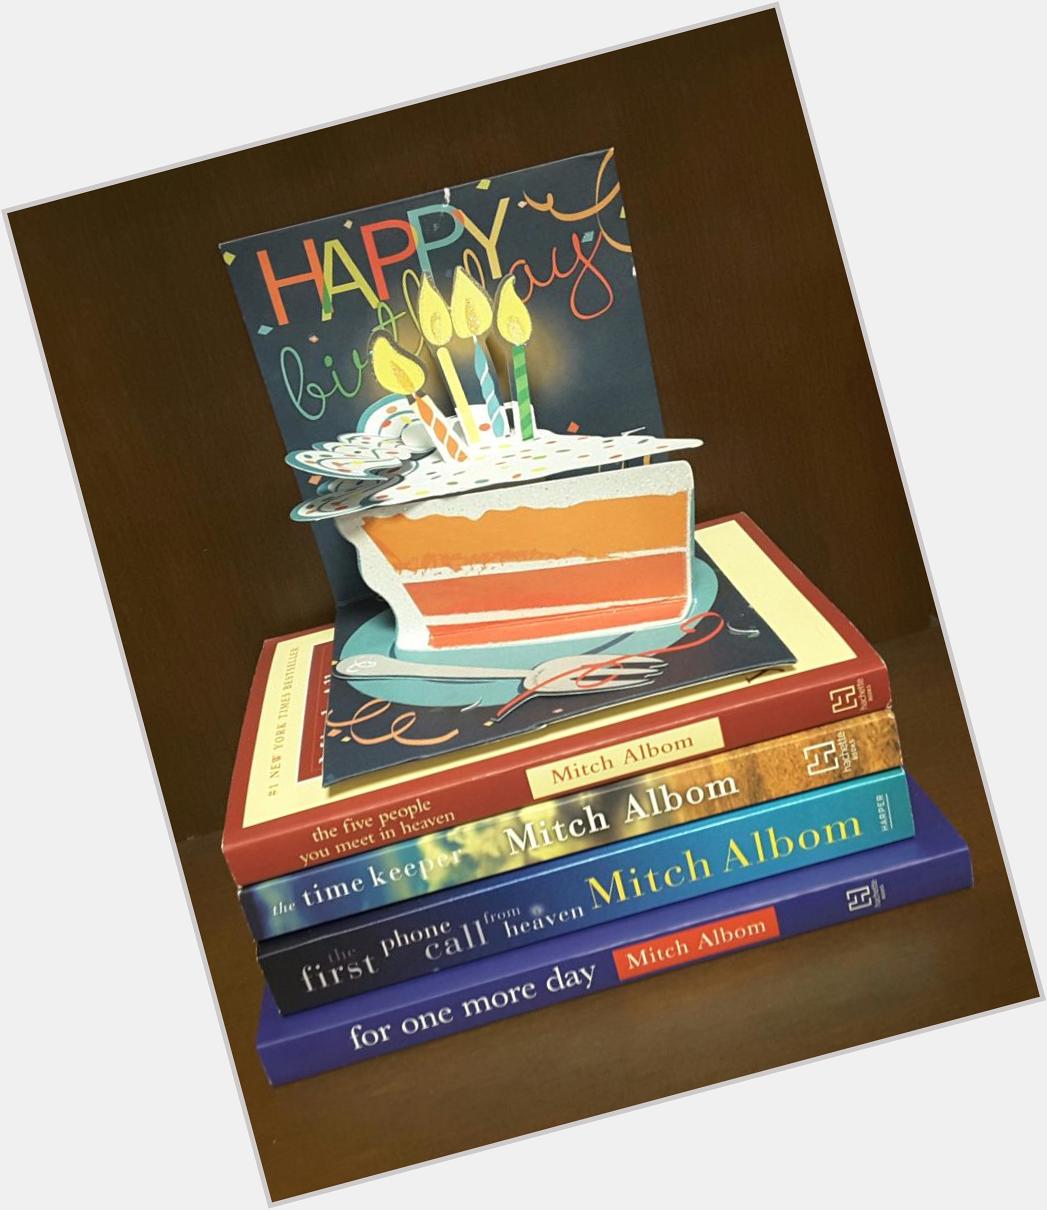 Happy Birthday Mitch Albom! May your day be as wonderful as your books!   